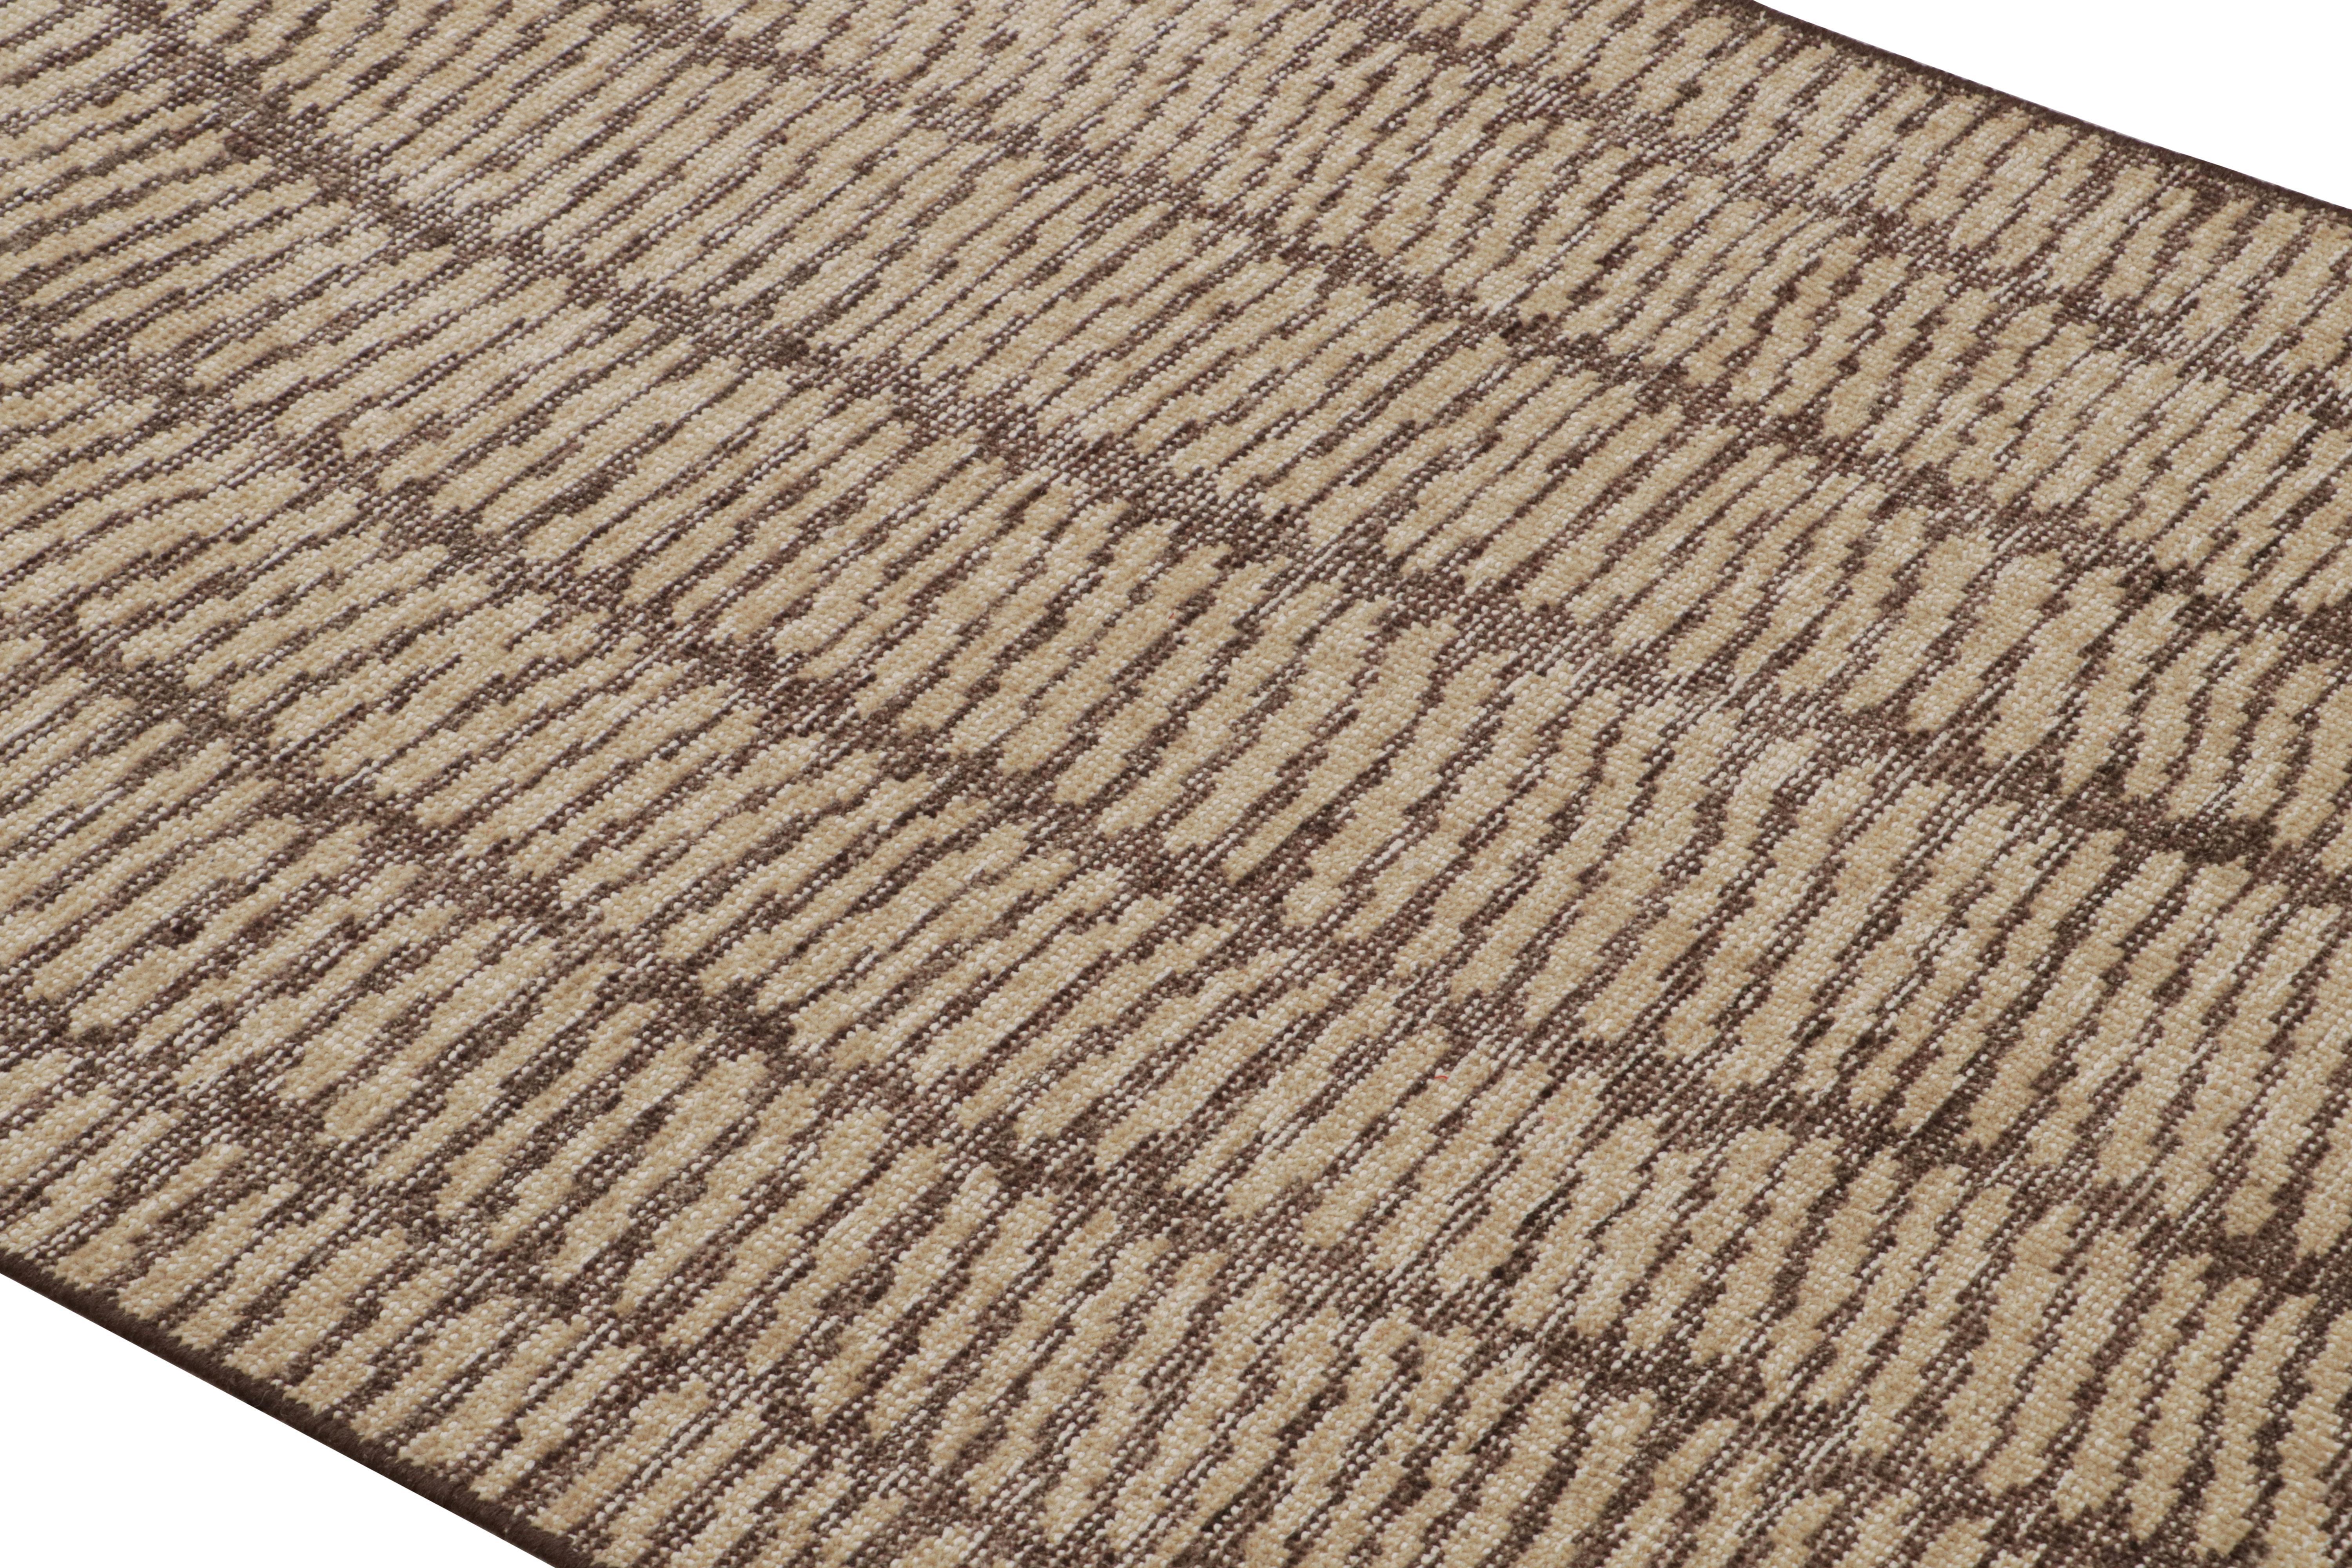 Indian Rug & Kilim’s Custom Abstract Rug With Beige-Brown Striped Geometric Patterns  For Sale